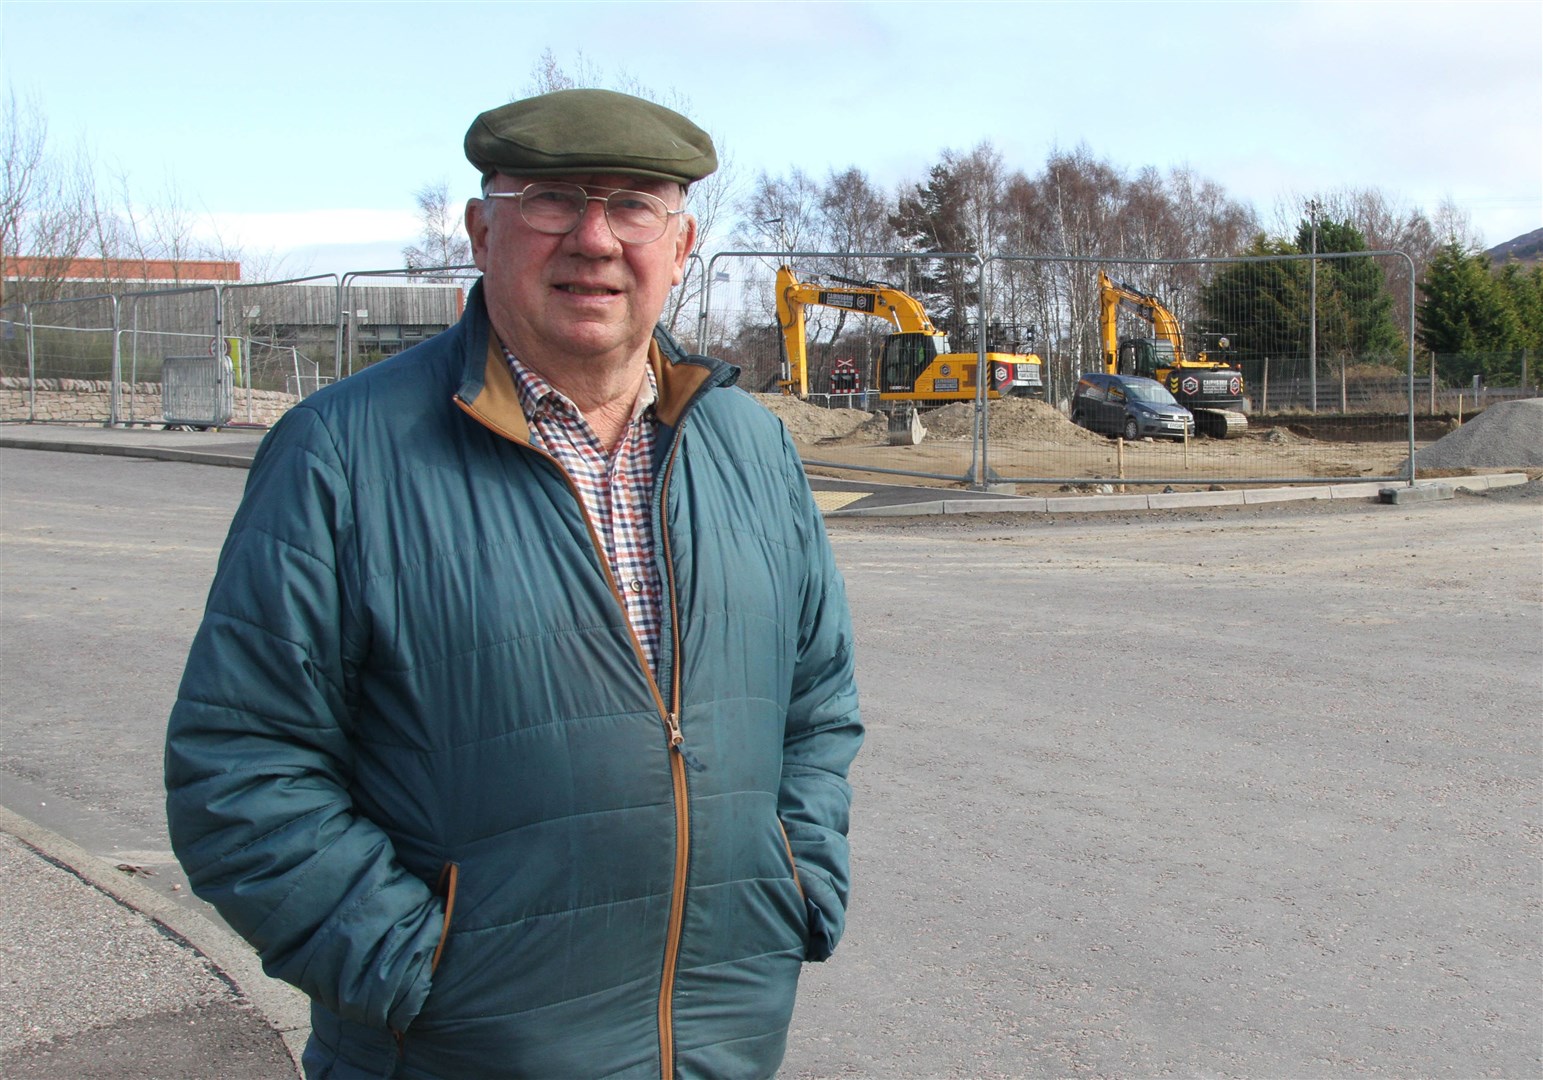 CNPA board member Willie McKenna at new affordable housing being built at Dalfaber in Aviemore.